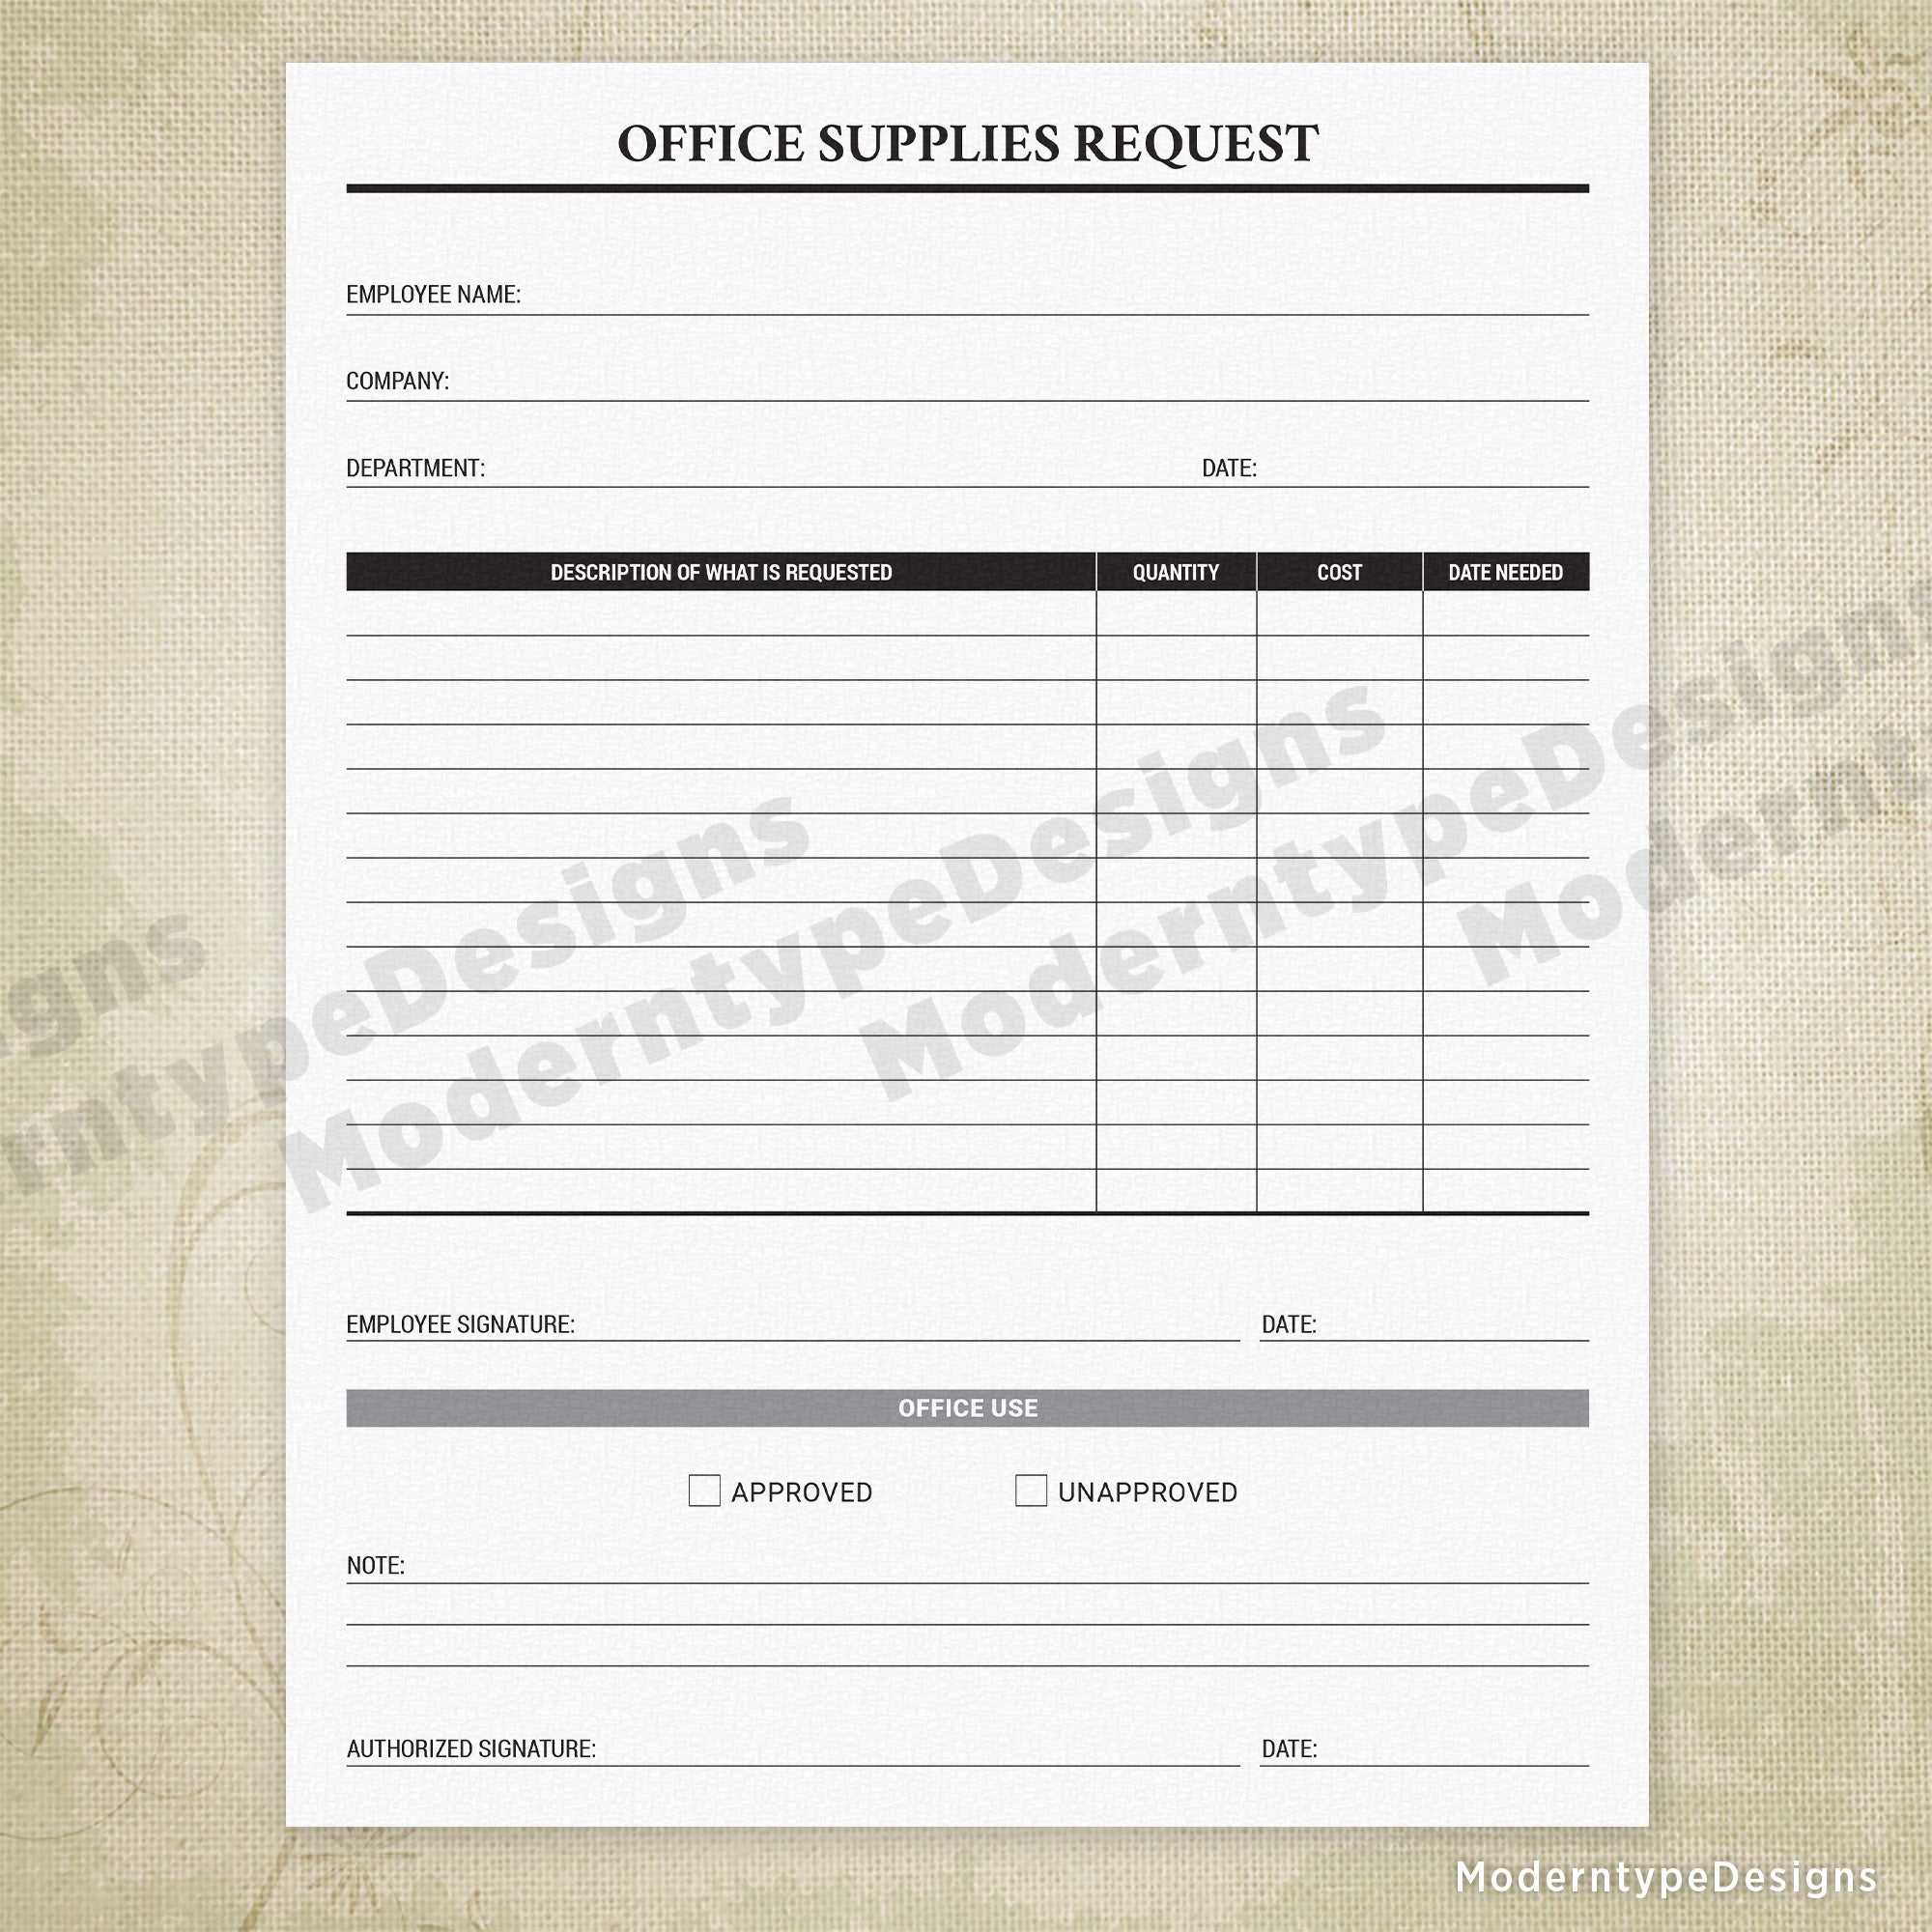 Office Supplies Request Printable Form